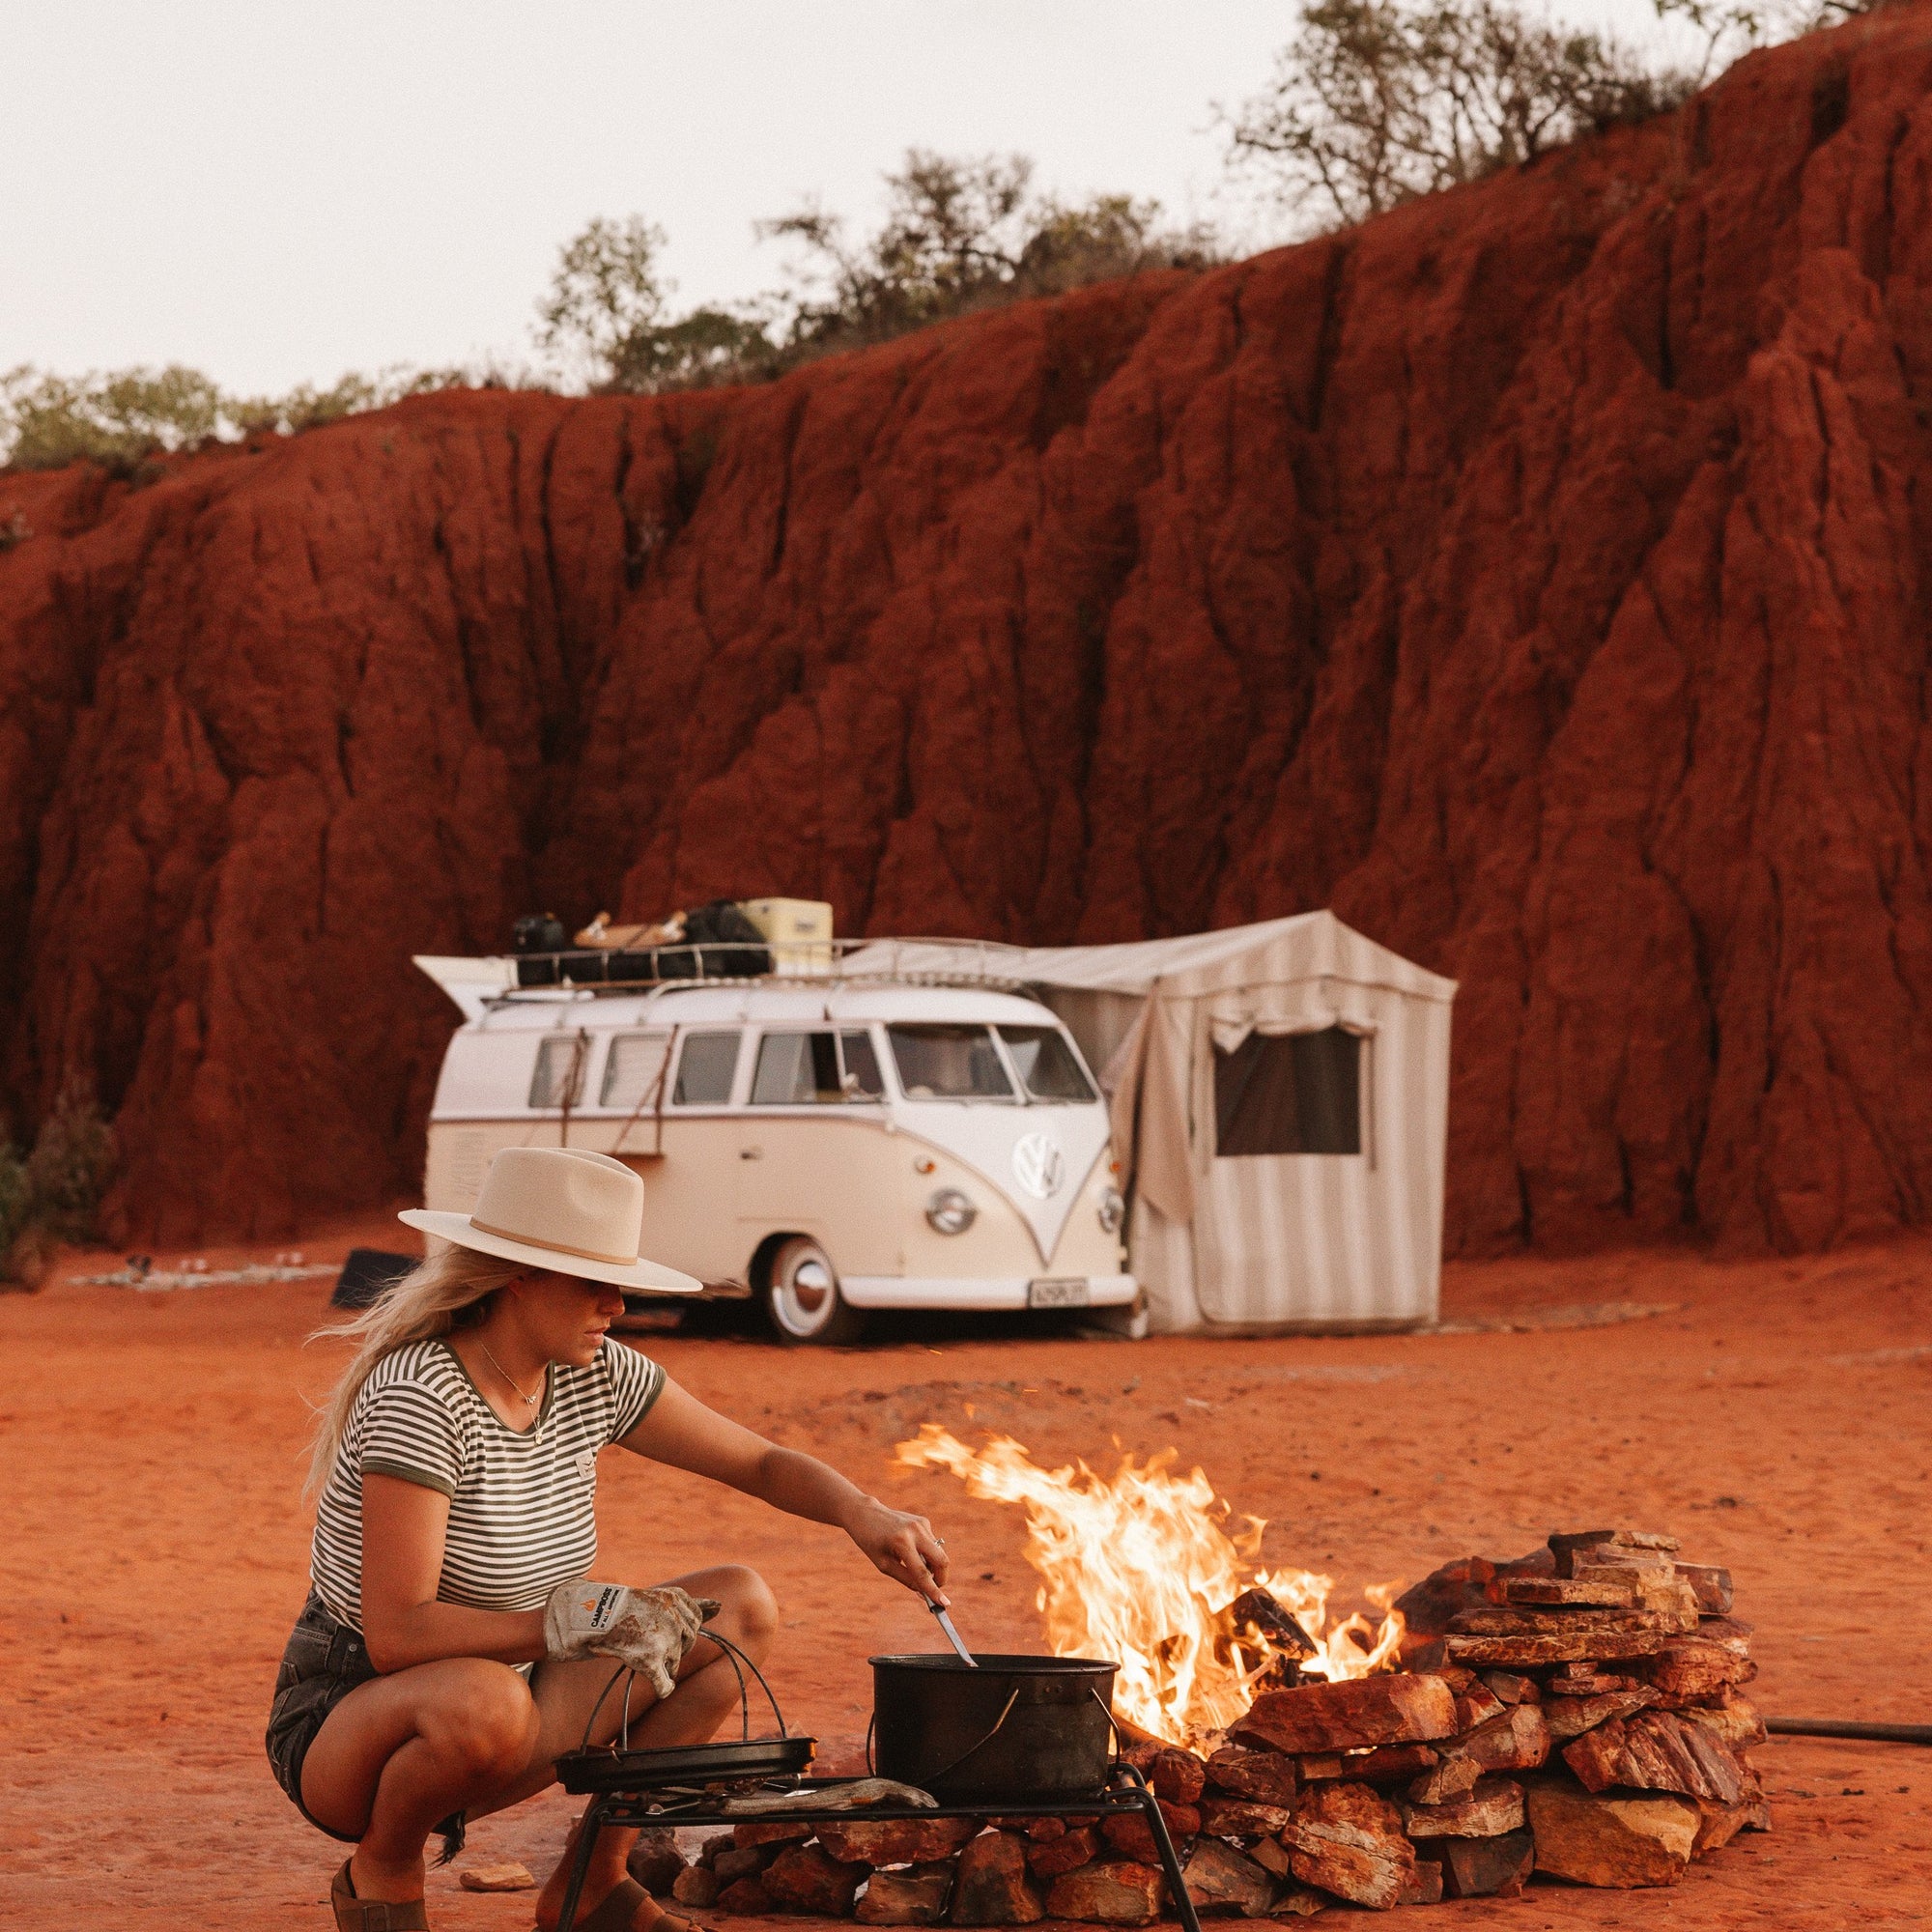 Kirianna cooking over the fire with Uluru and her van in the background